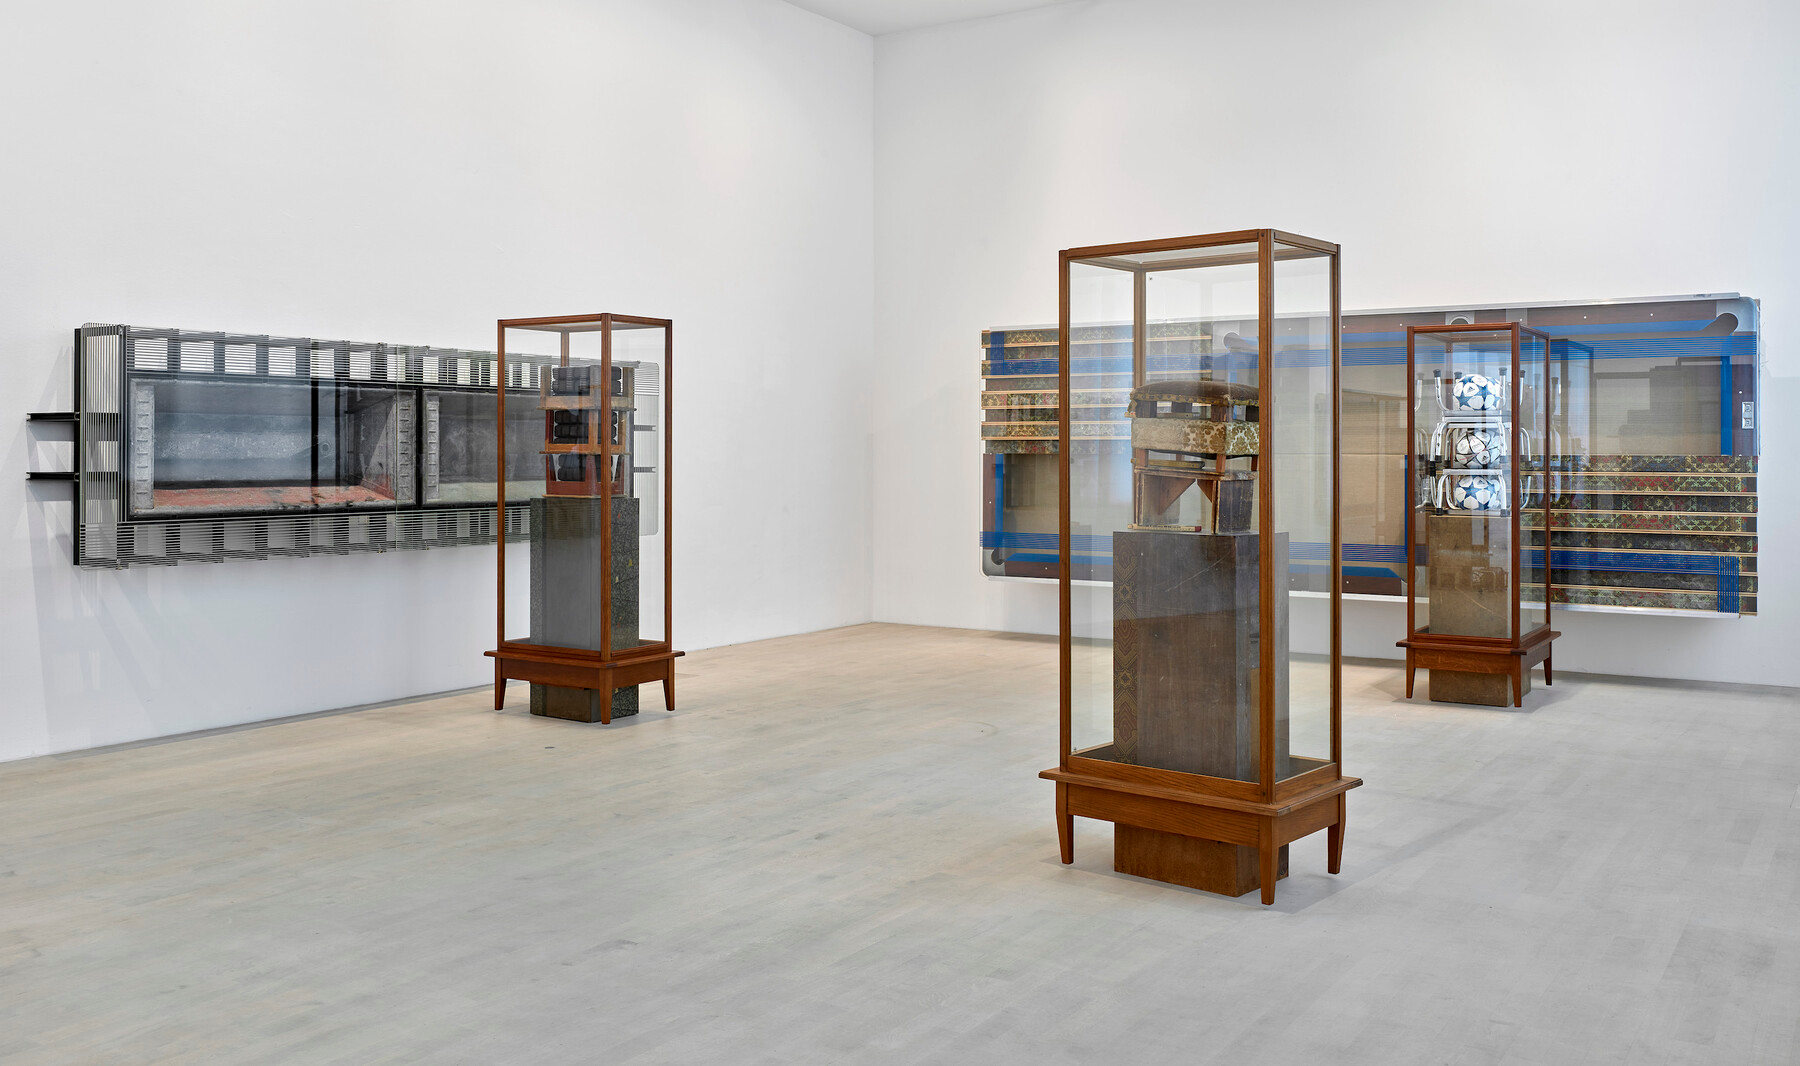 Gallery installation of sculpture in glass vitrines